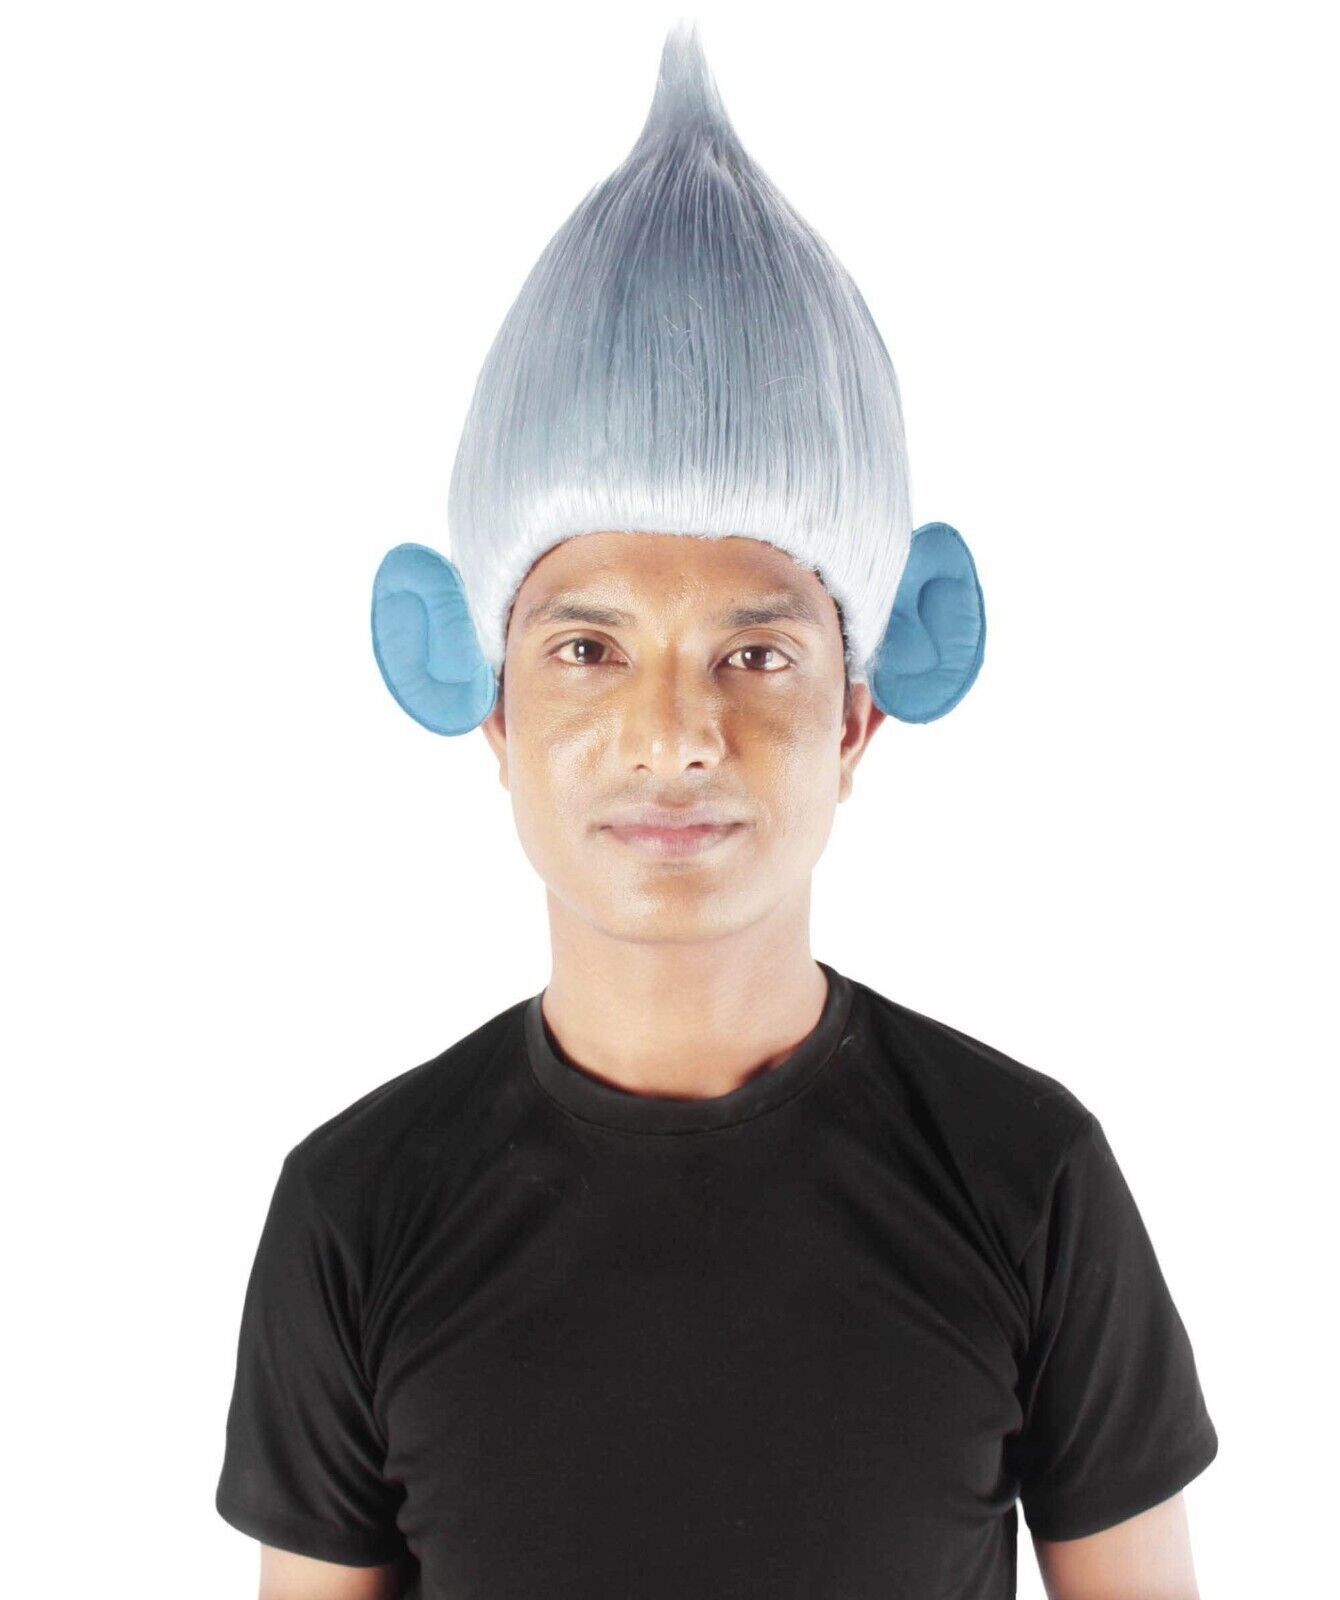 HPO Adult Men's Pointy Fairy Troll Wig with Blue Ears, HM-600A-DGY